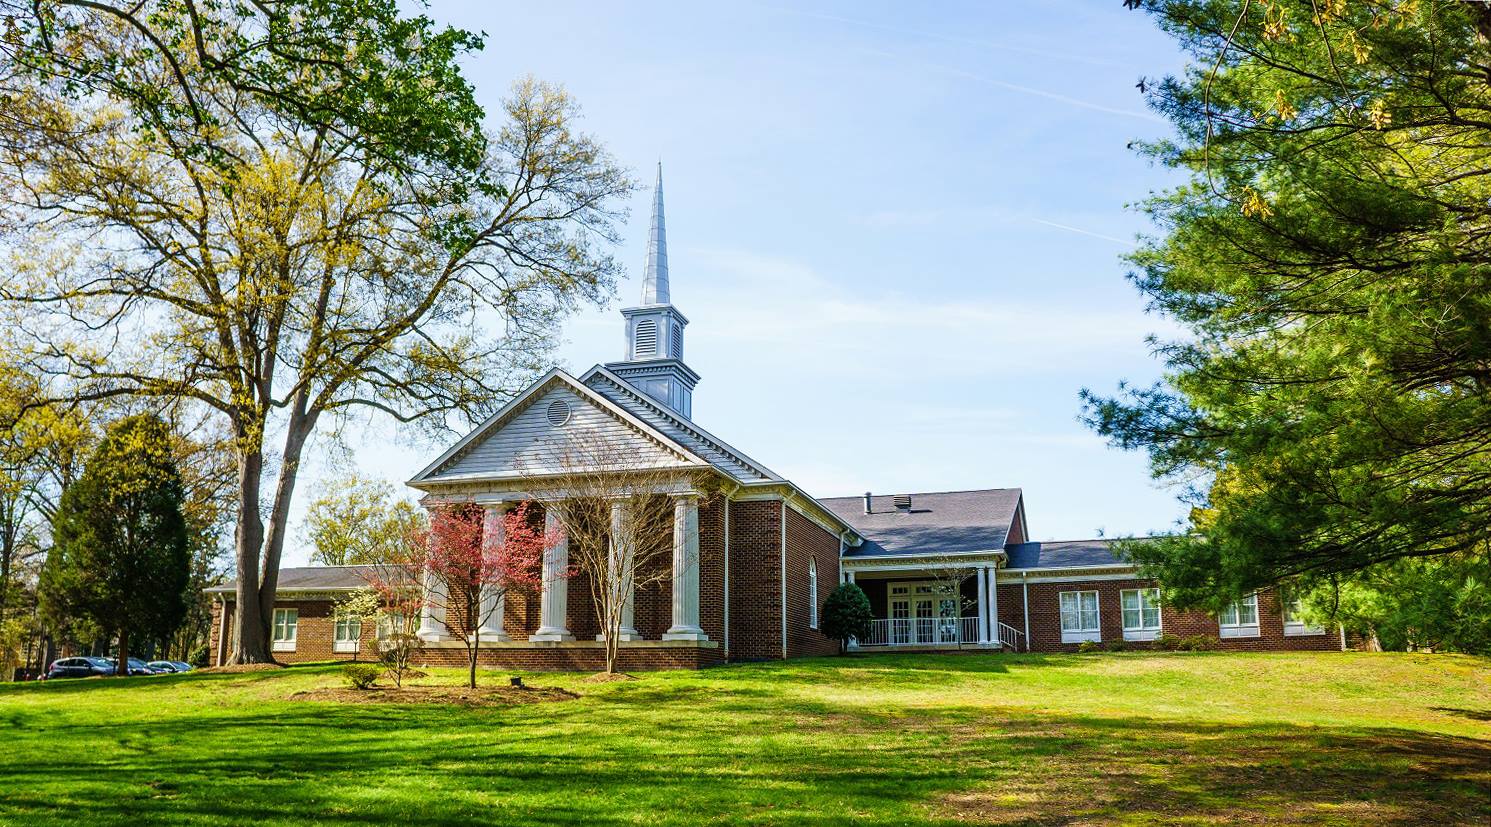 Serves as meeting house for the Mount Vernon and Fort Belvoir congregations.
Services are held at 10:30AM
Sunday School is at 11:30AM